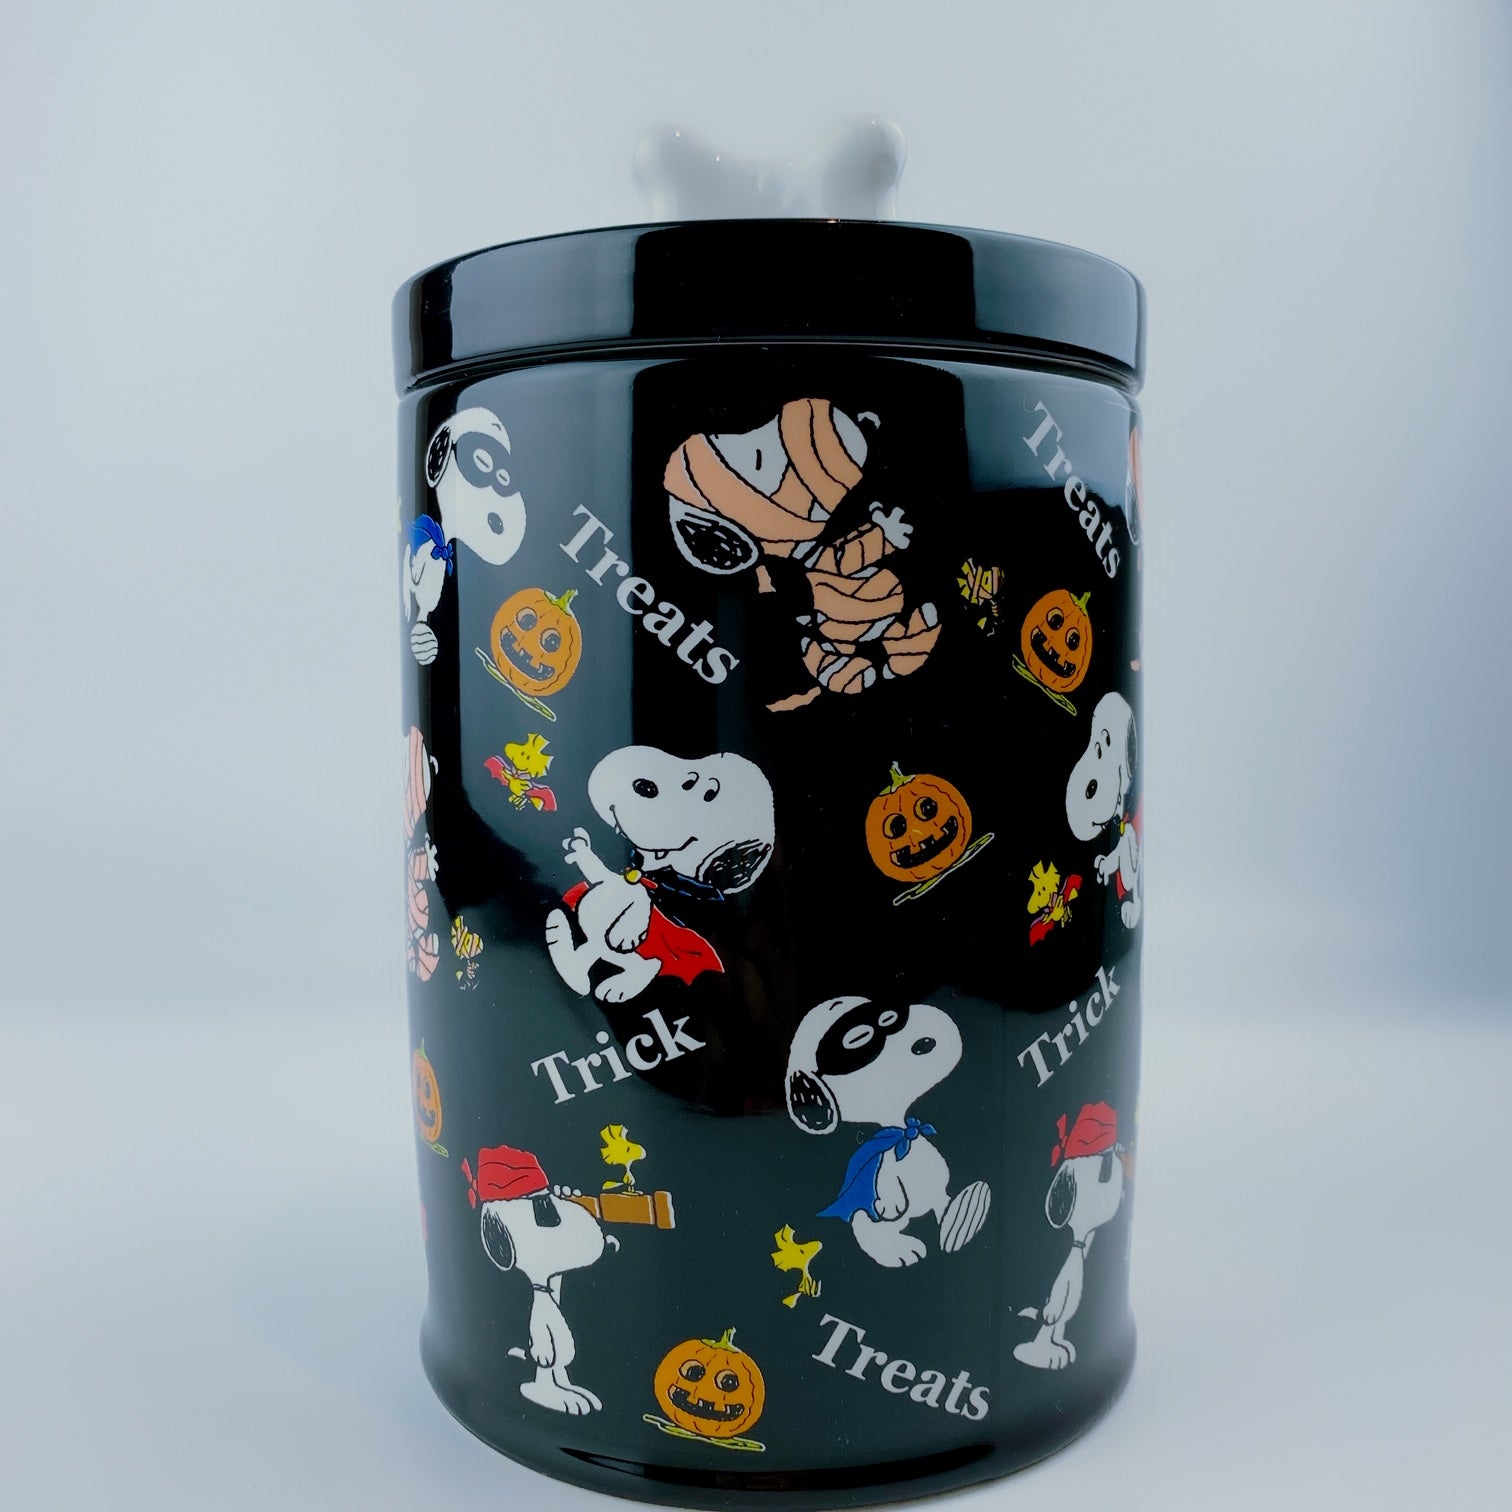 Peanuts Snoopy Tumbler with Handle